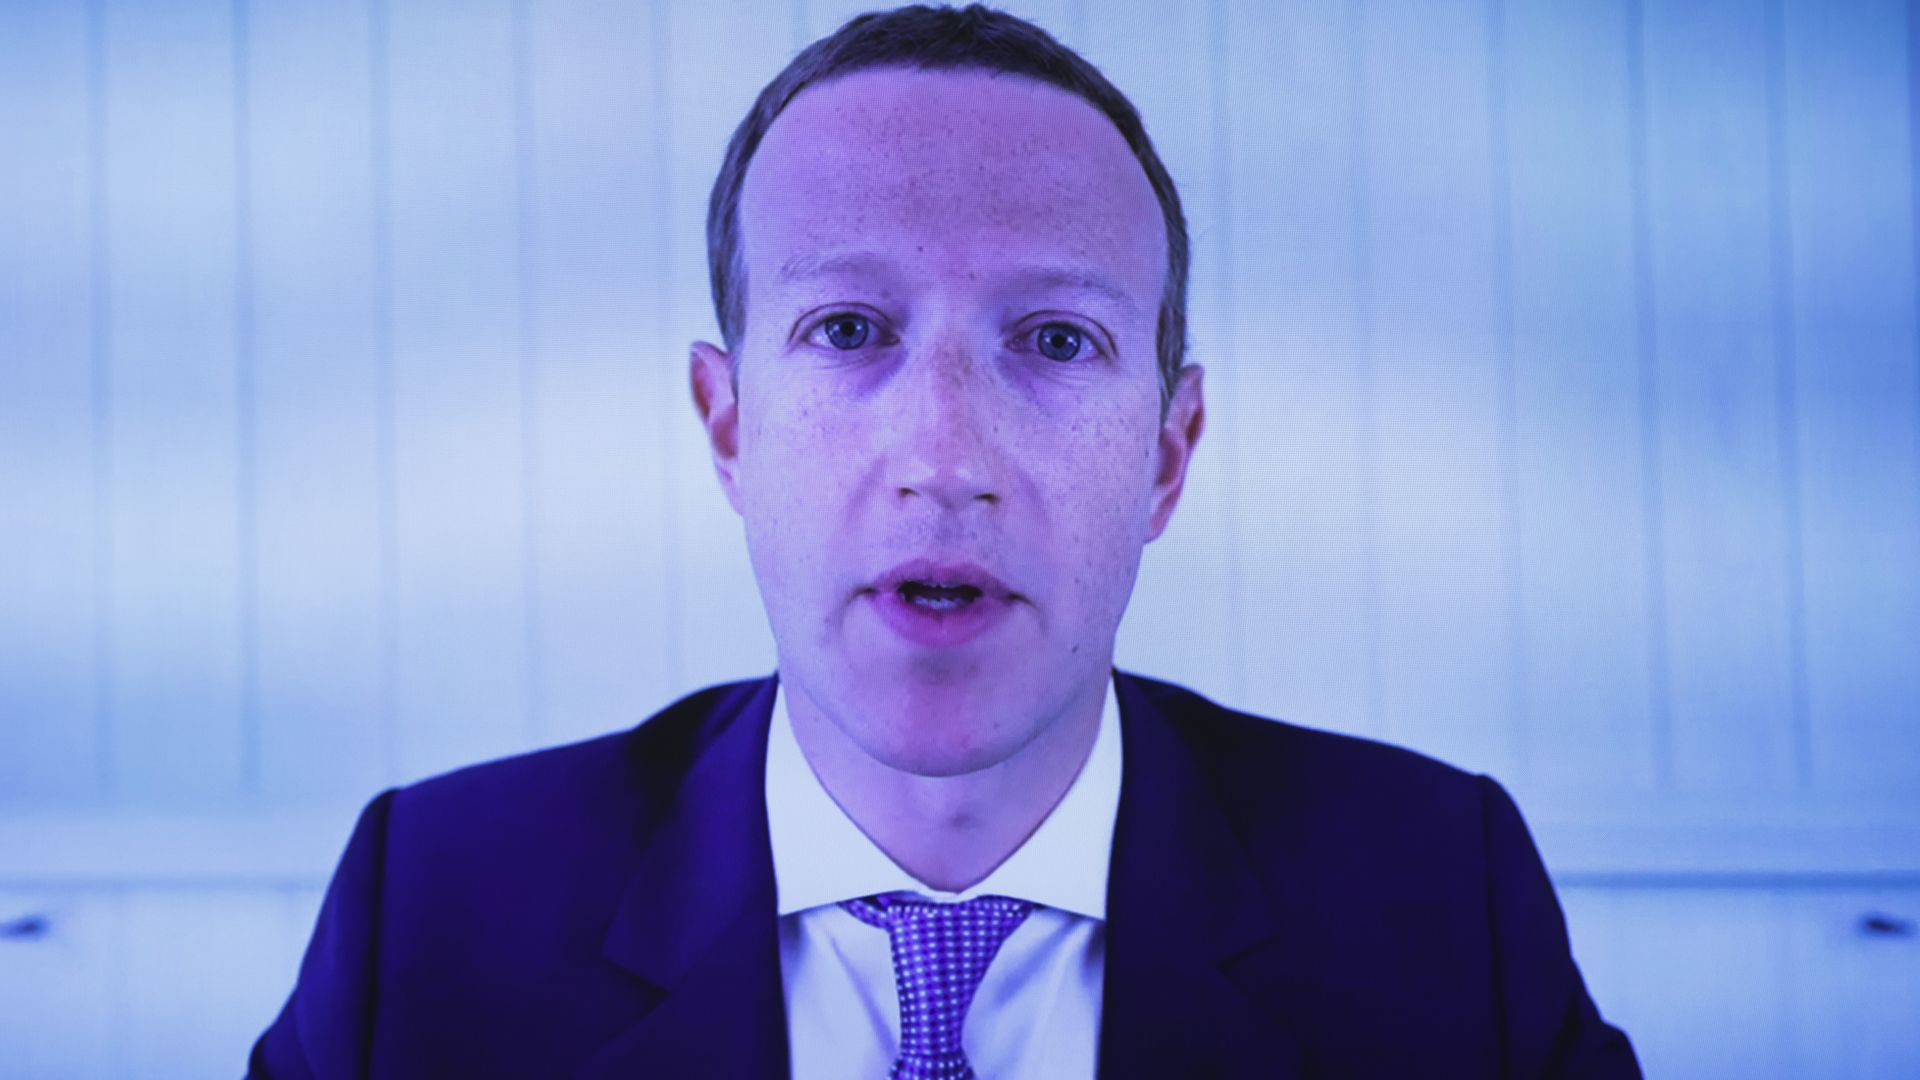 Photo of Facebook CEO Mark Zuckerberg as he appeared in video testimony before Congress